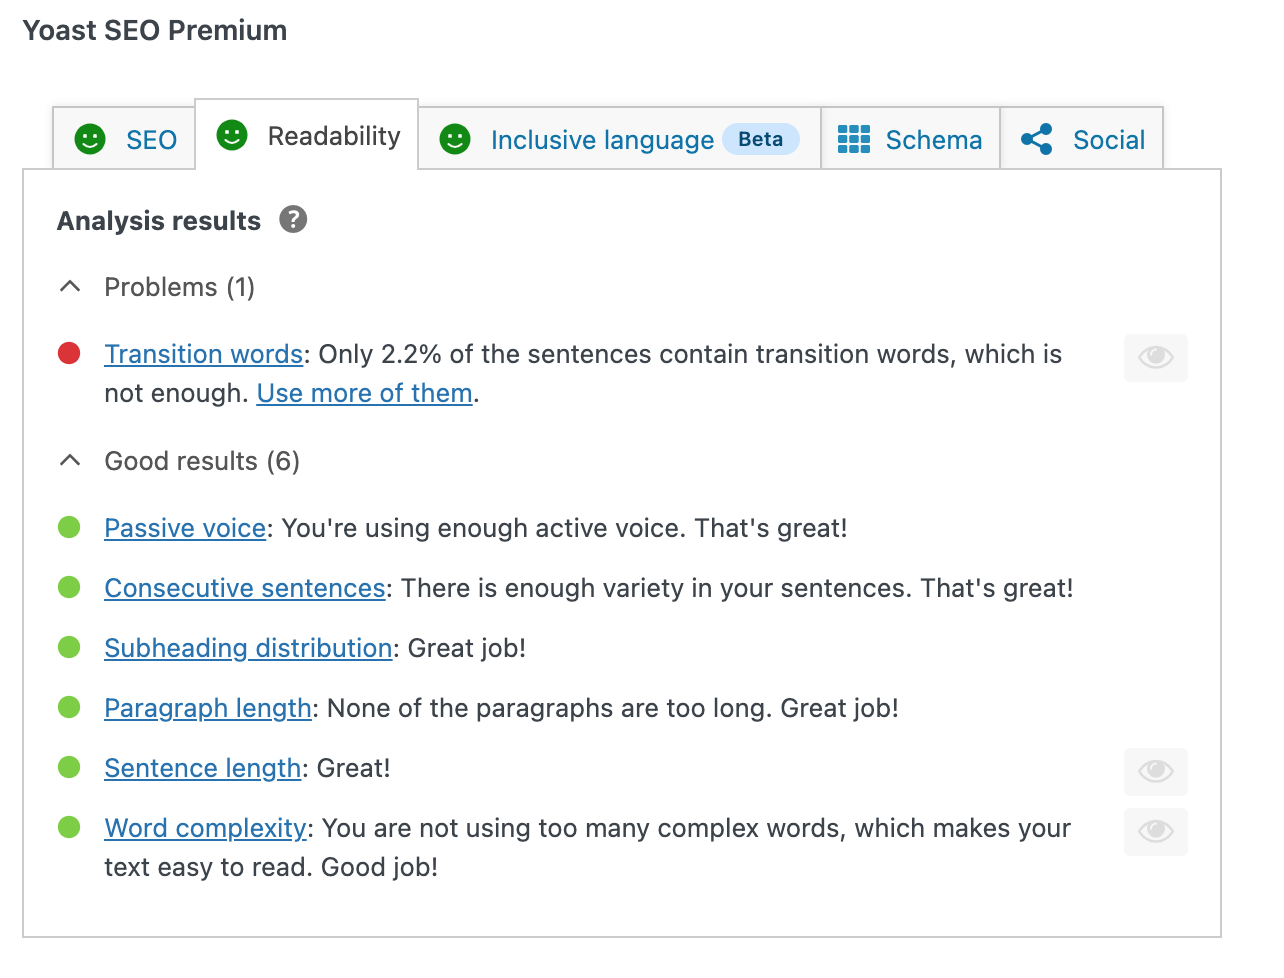 Transition words trong Yoast SEO